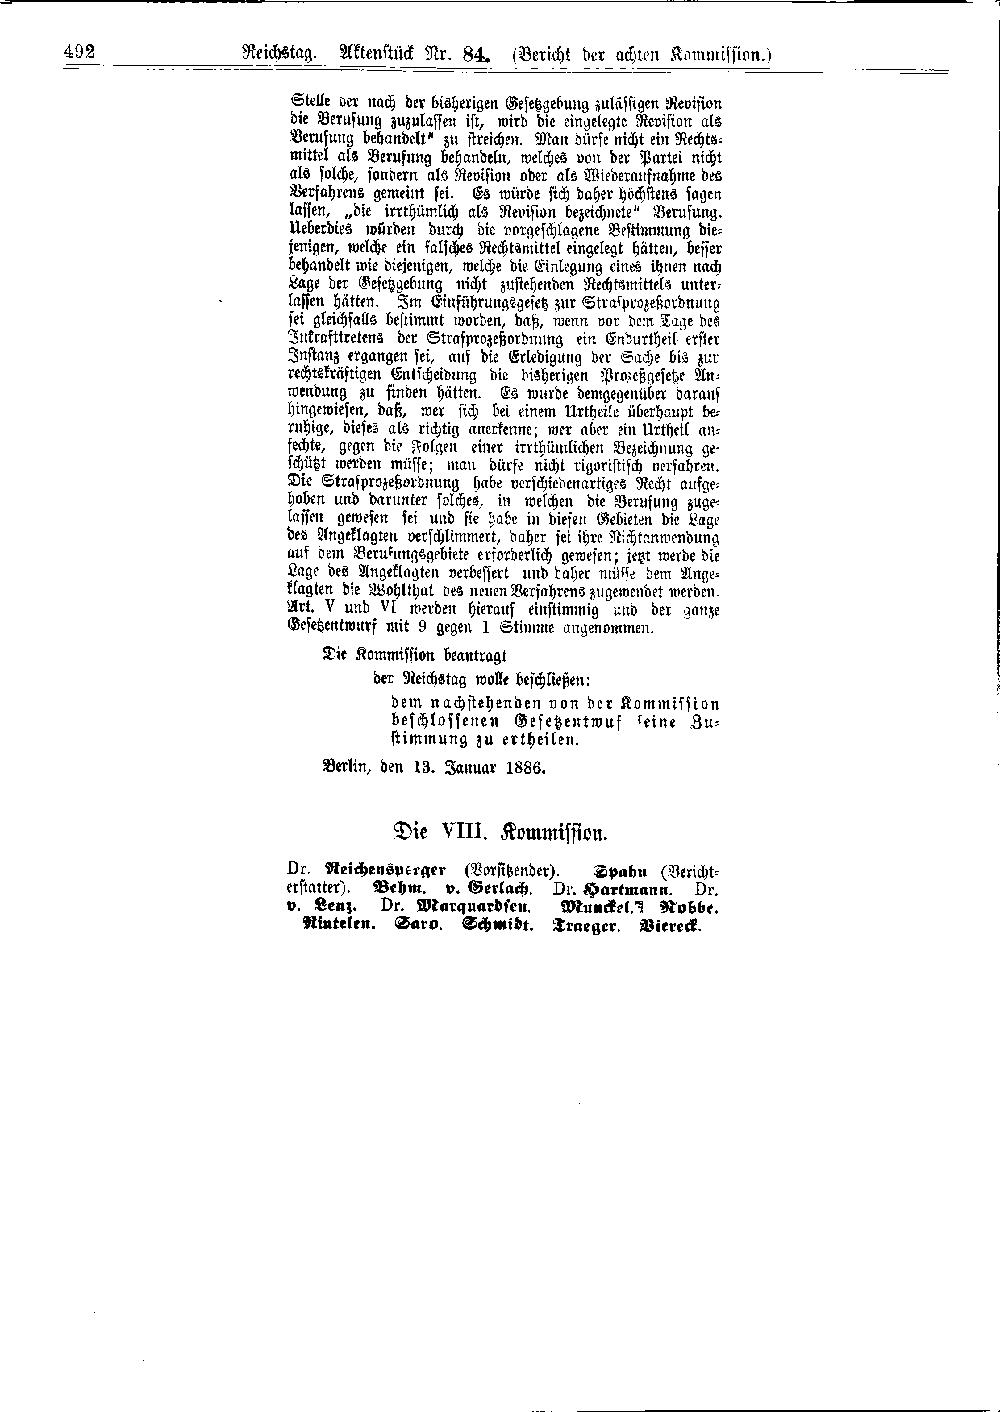 Scan of page 492